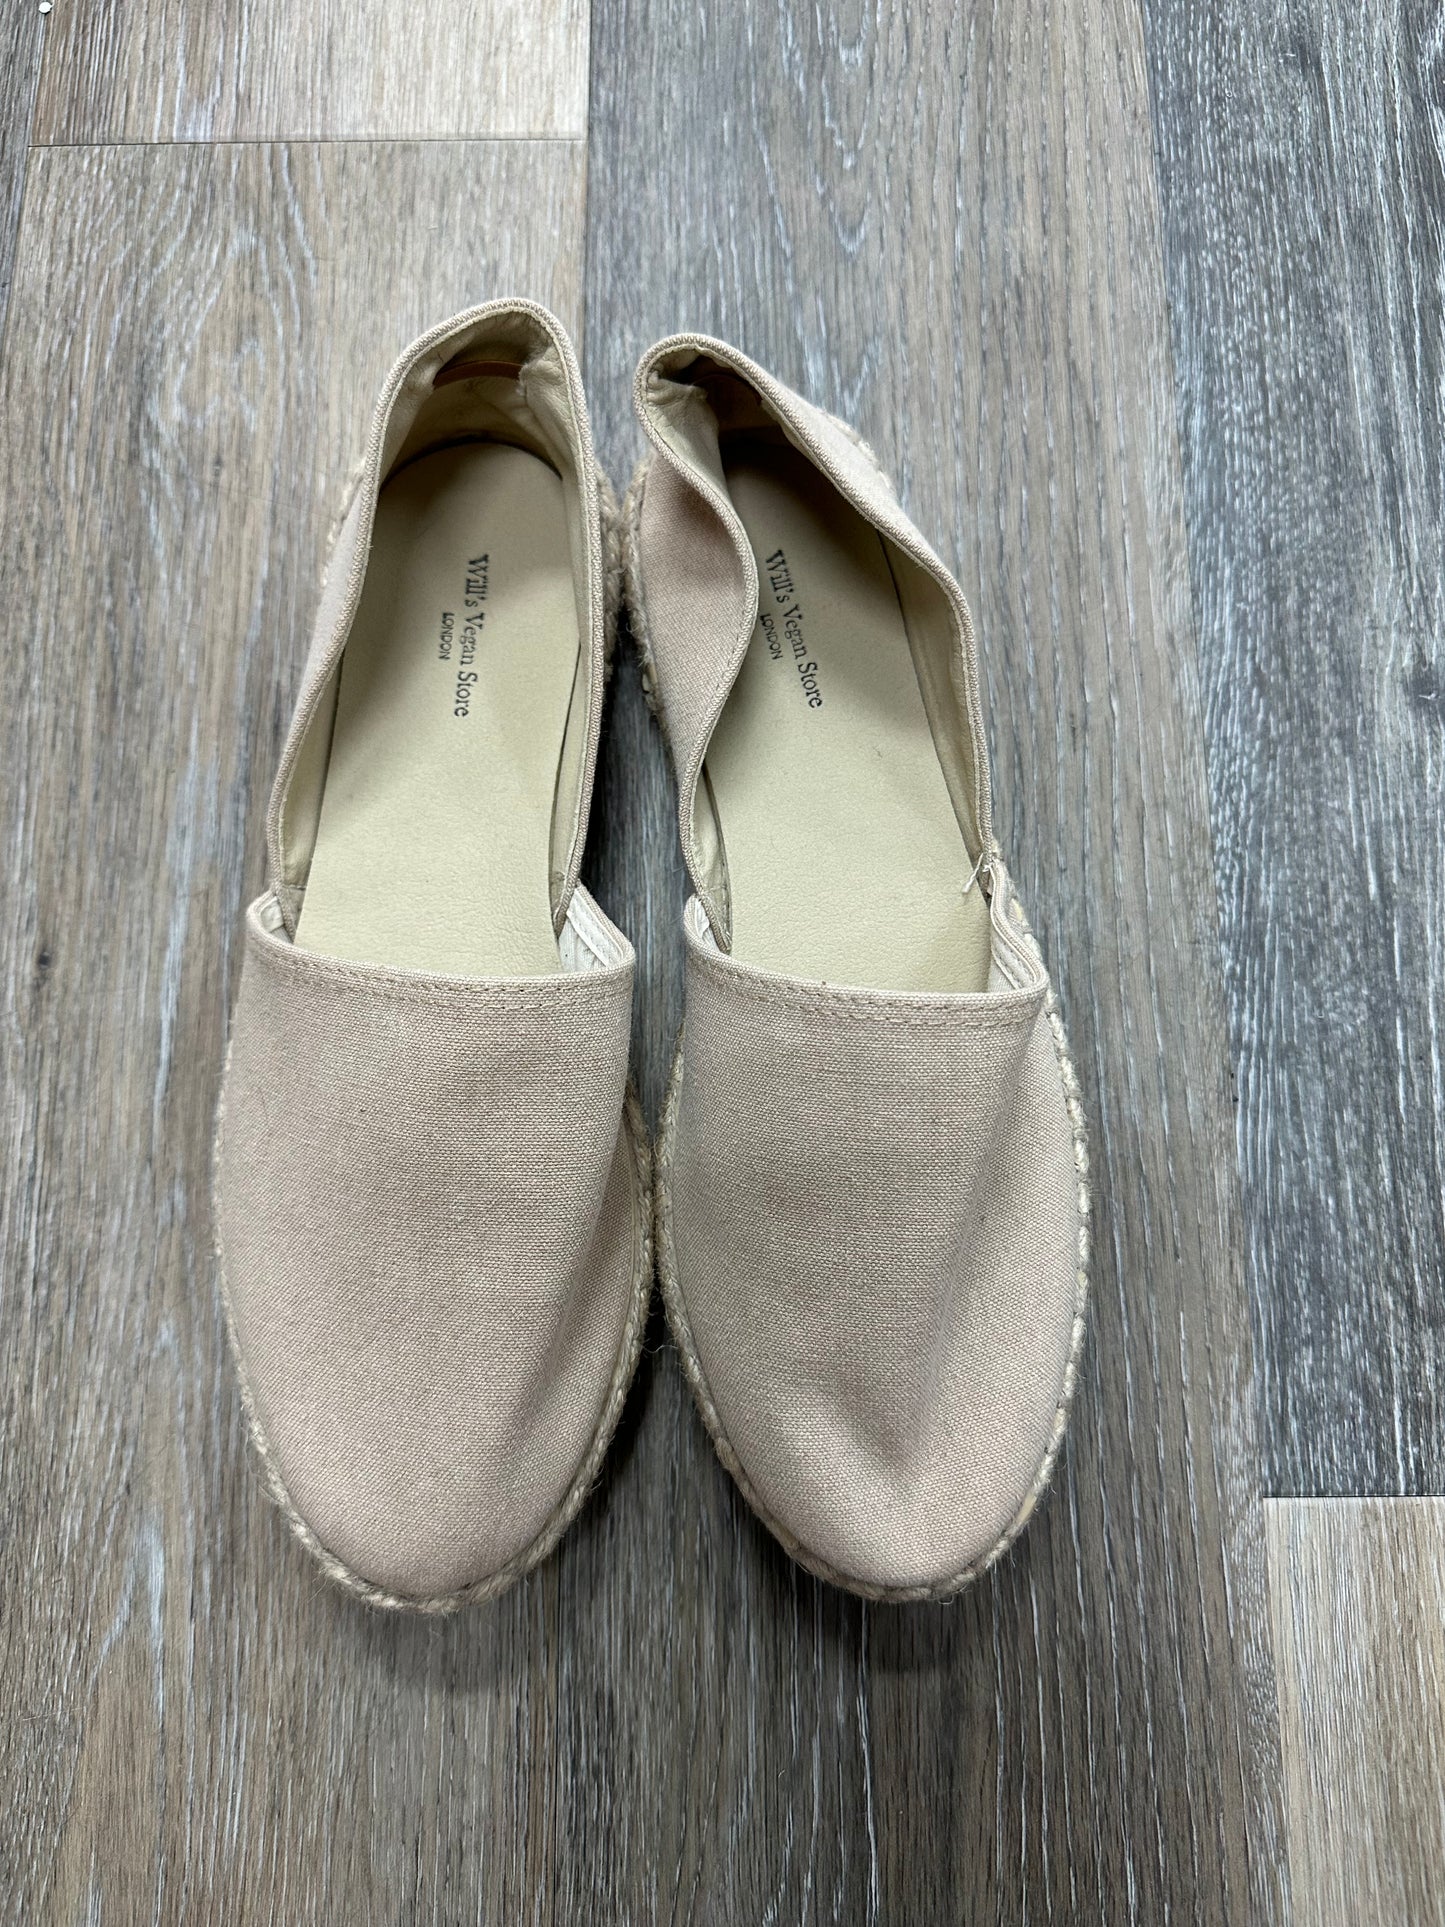 Shoes Flats Other By Wills Vegan Store  Size: 9